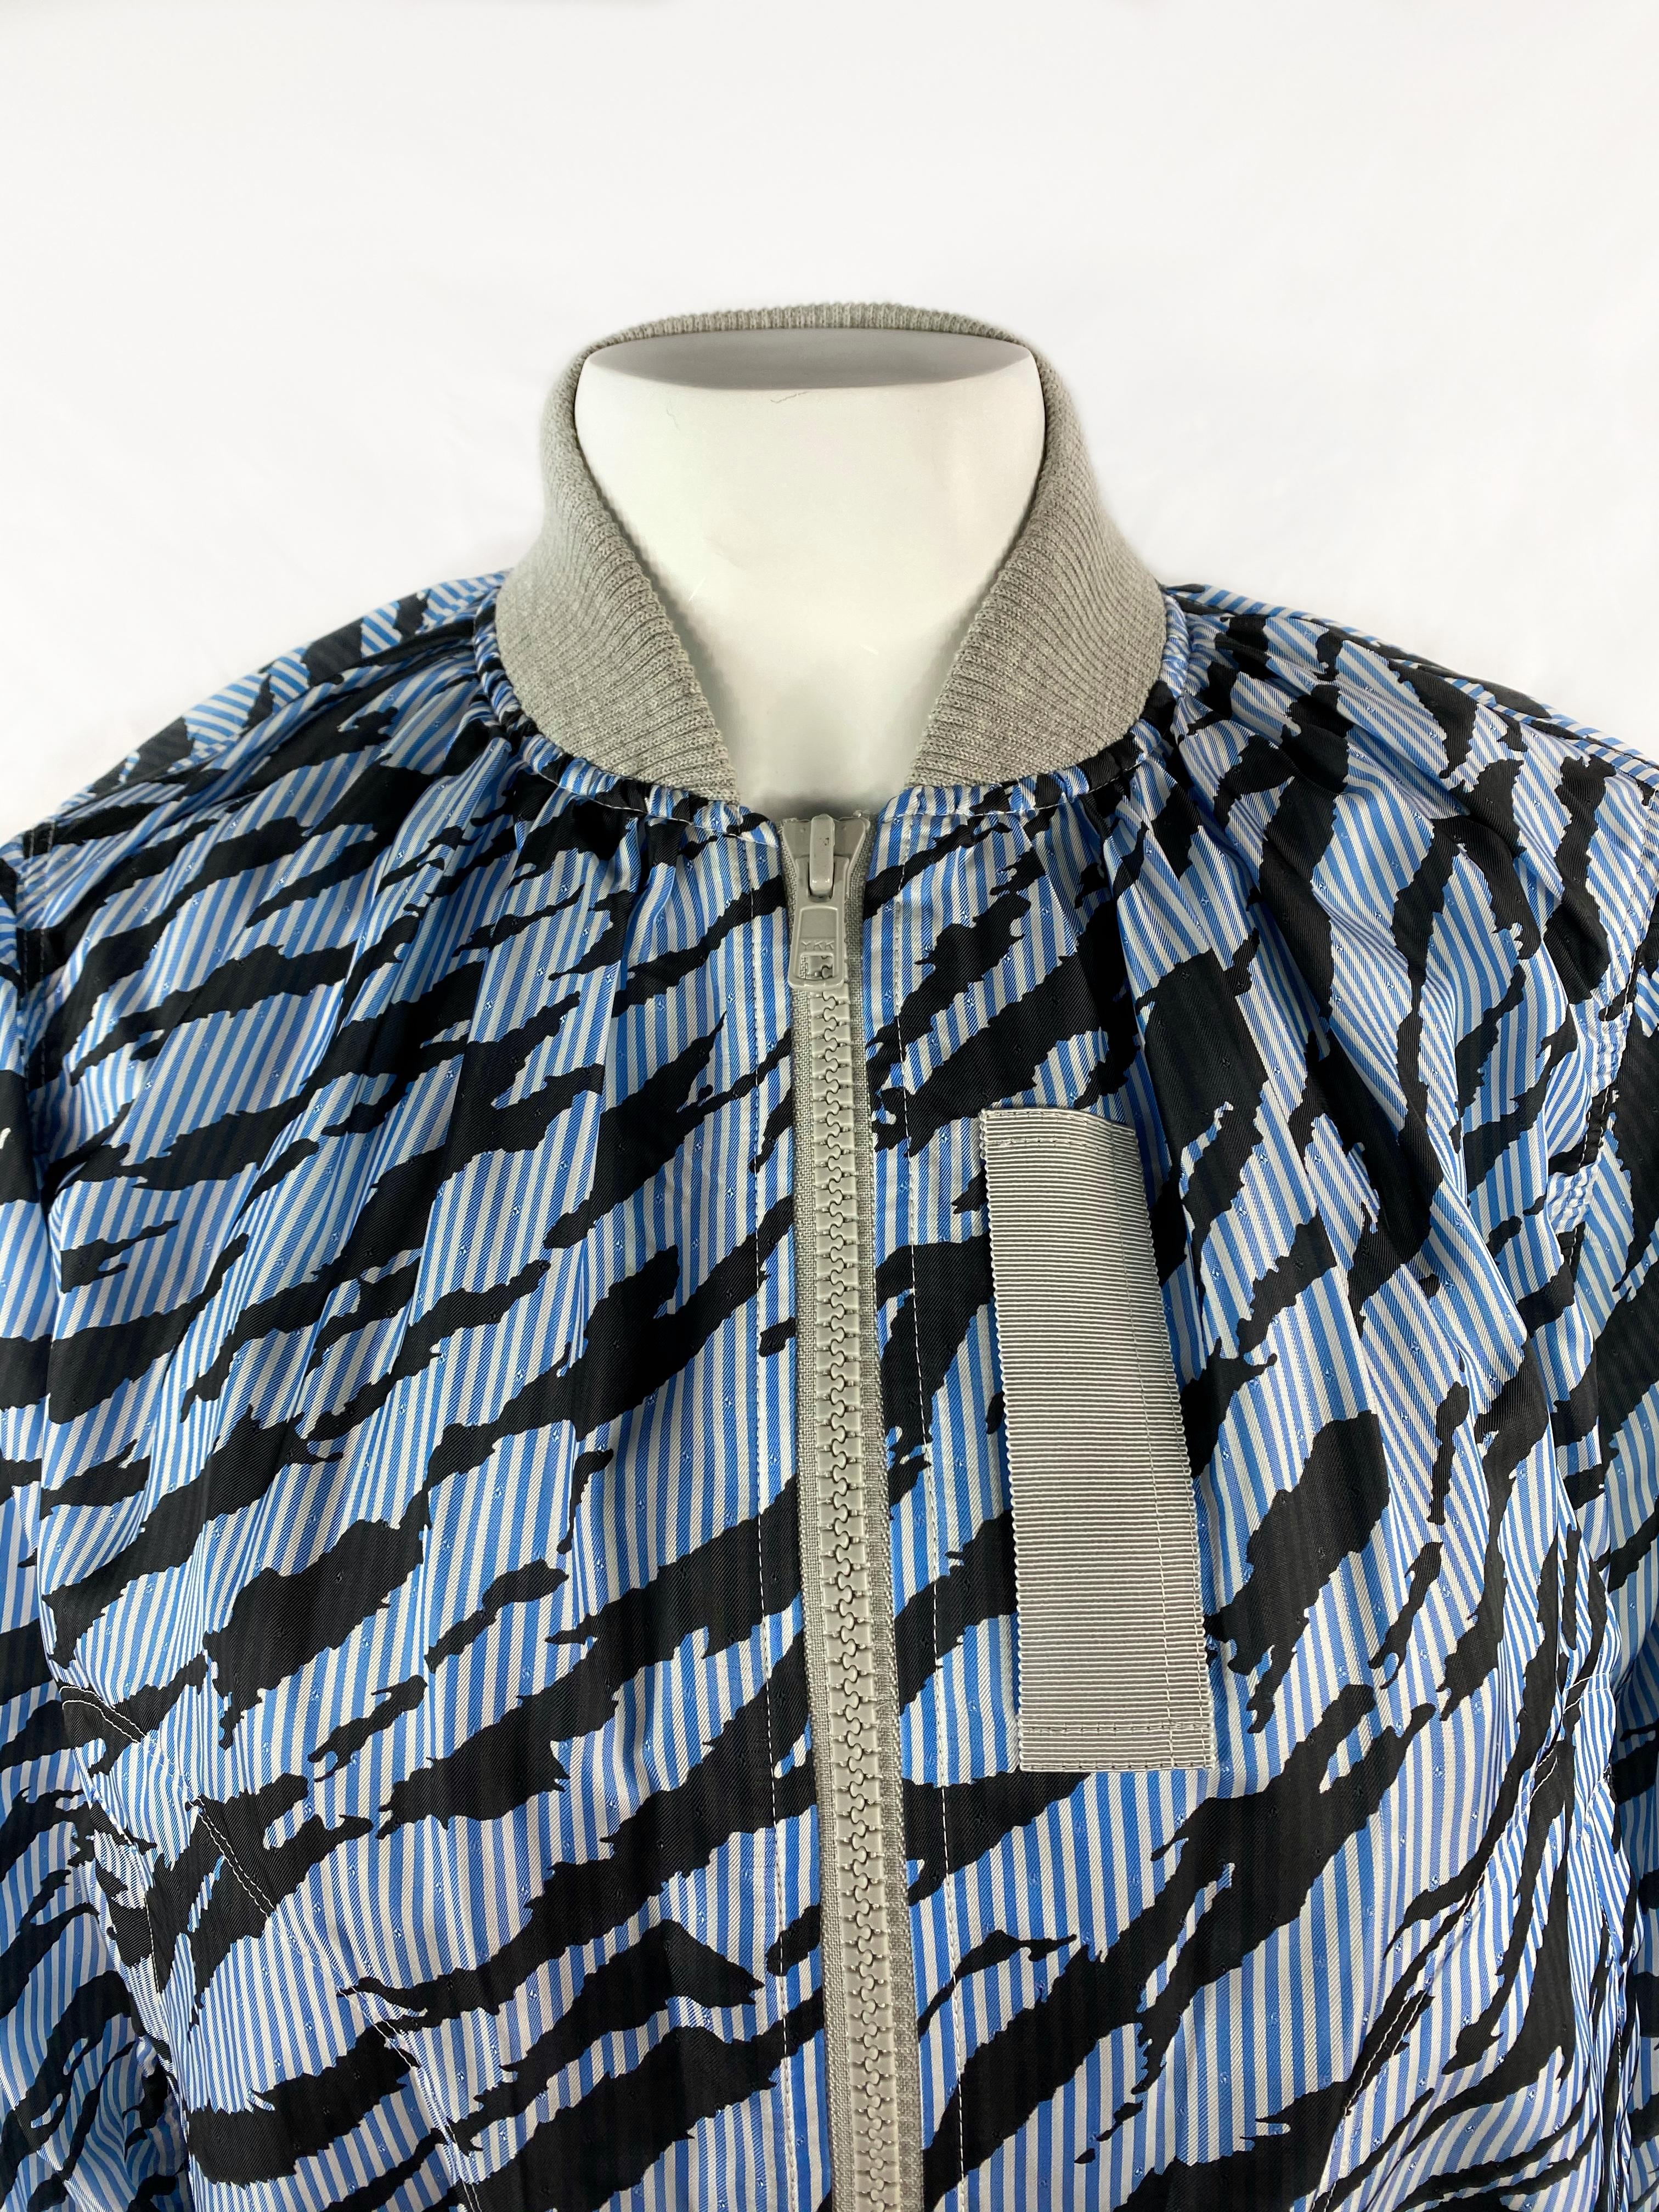 Sacai Luck Light Blue Zebra Striped Bomber Jacket Size 2

Product details:
BRAND NEW, never worn, with tags attached 
Size US2
Light blue, black and grey
Striped zebra print 
Front grey zipper closure
Featuring one open pocket on each side
Zipped